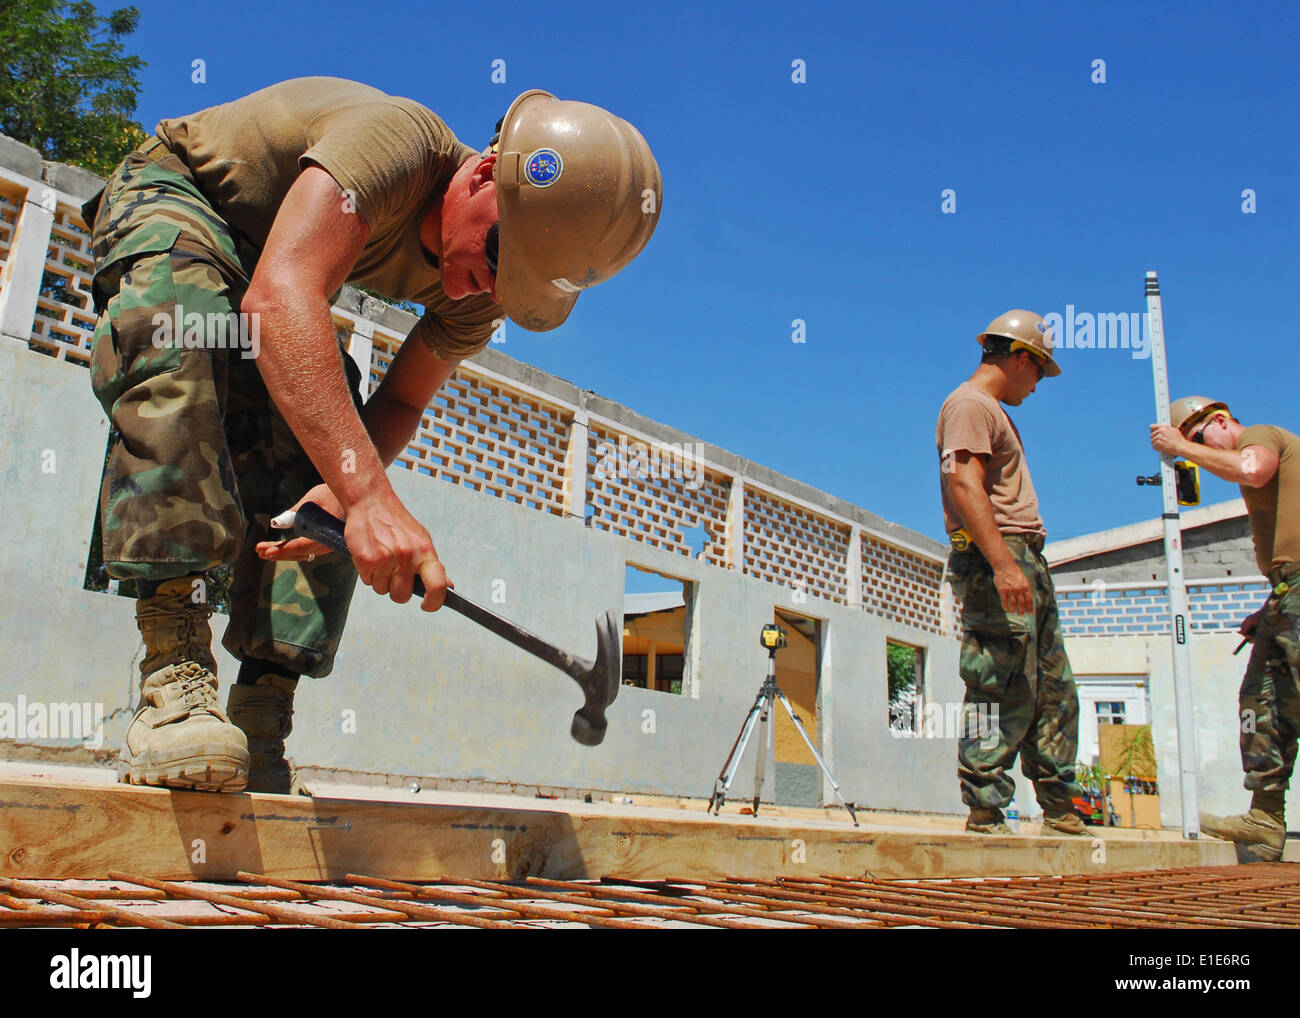 100817-N-4044H-005 DILI, Timor-Leste (Aug. 17, 2010) Seabees assigned to Naval Mobile Construction Battalion (NMCB) 11 build fo Stock Photo